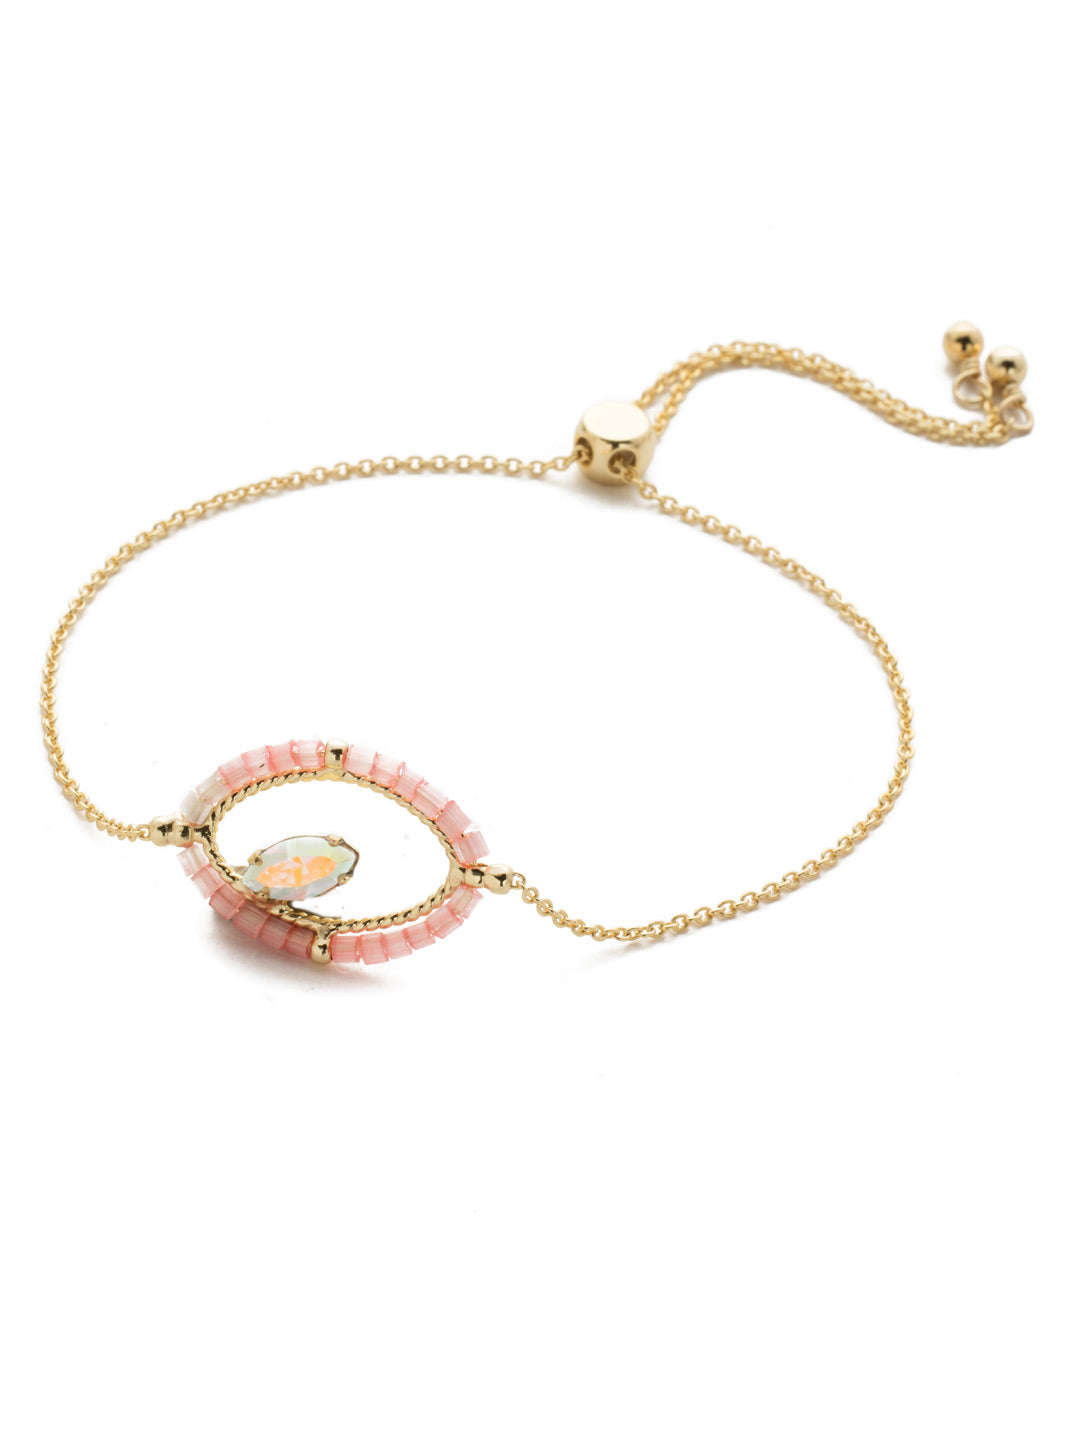 Eye of the Beholder Slider Bracelet - BEK34BGISS - Slide on this attention-getter when you want to be noticed. The single stone encircled in beadwork is one-of-a-kind, just like you. Slider bracelet closure. From Sorrelli's Island Sun collection in our Bright Gold-tone finish.